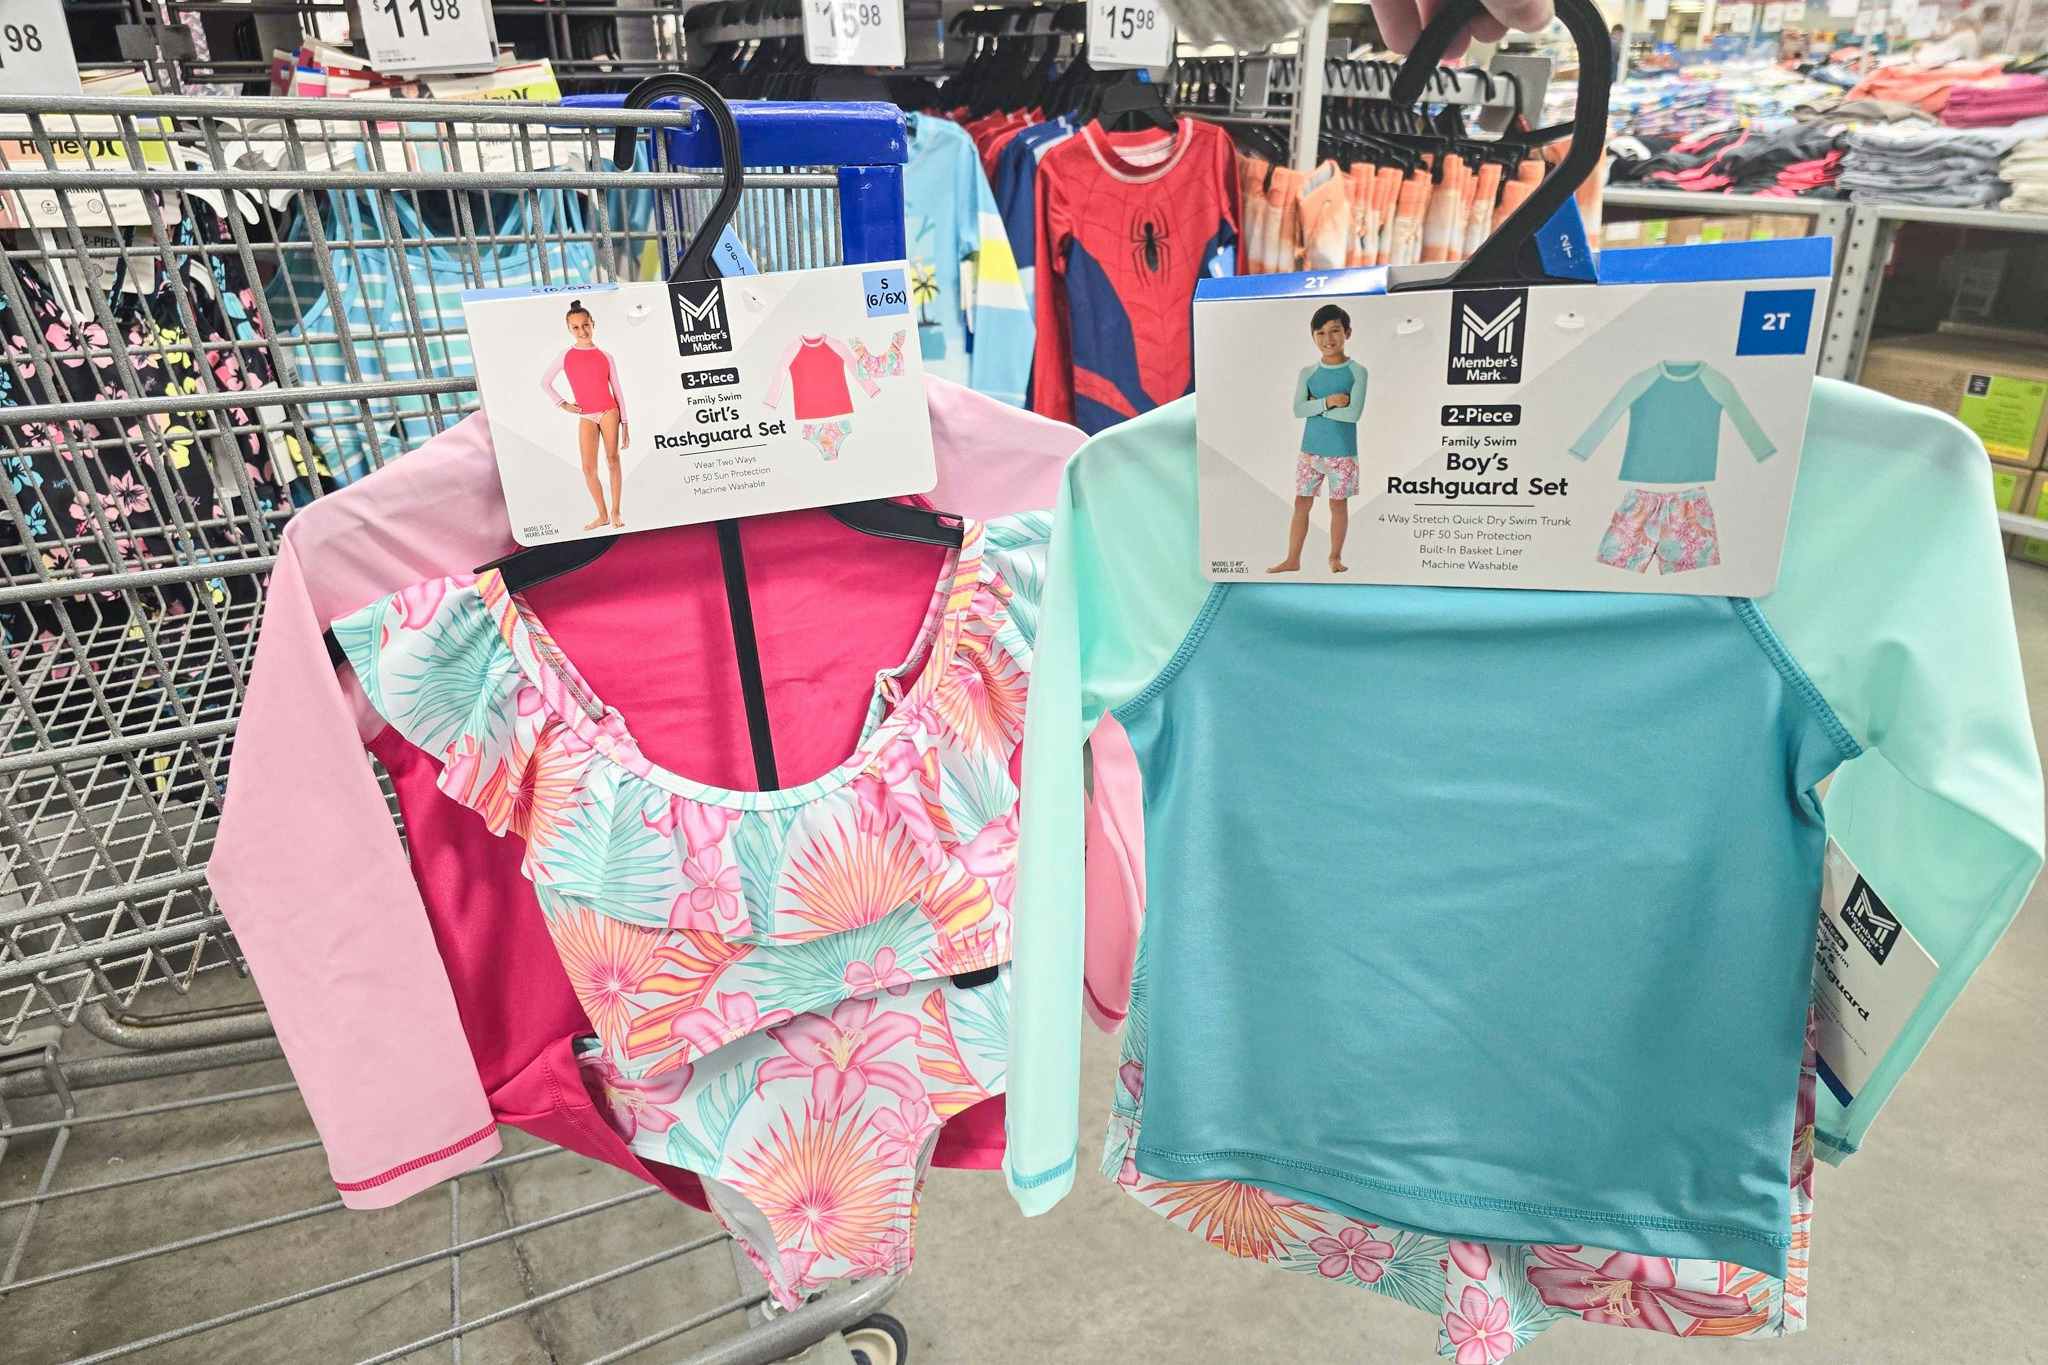 New Member's Mark Matching Family Swimwear, as Low as $12.98 at Sam's Club